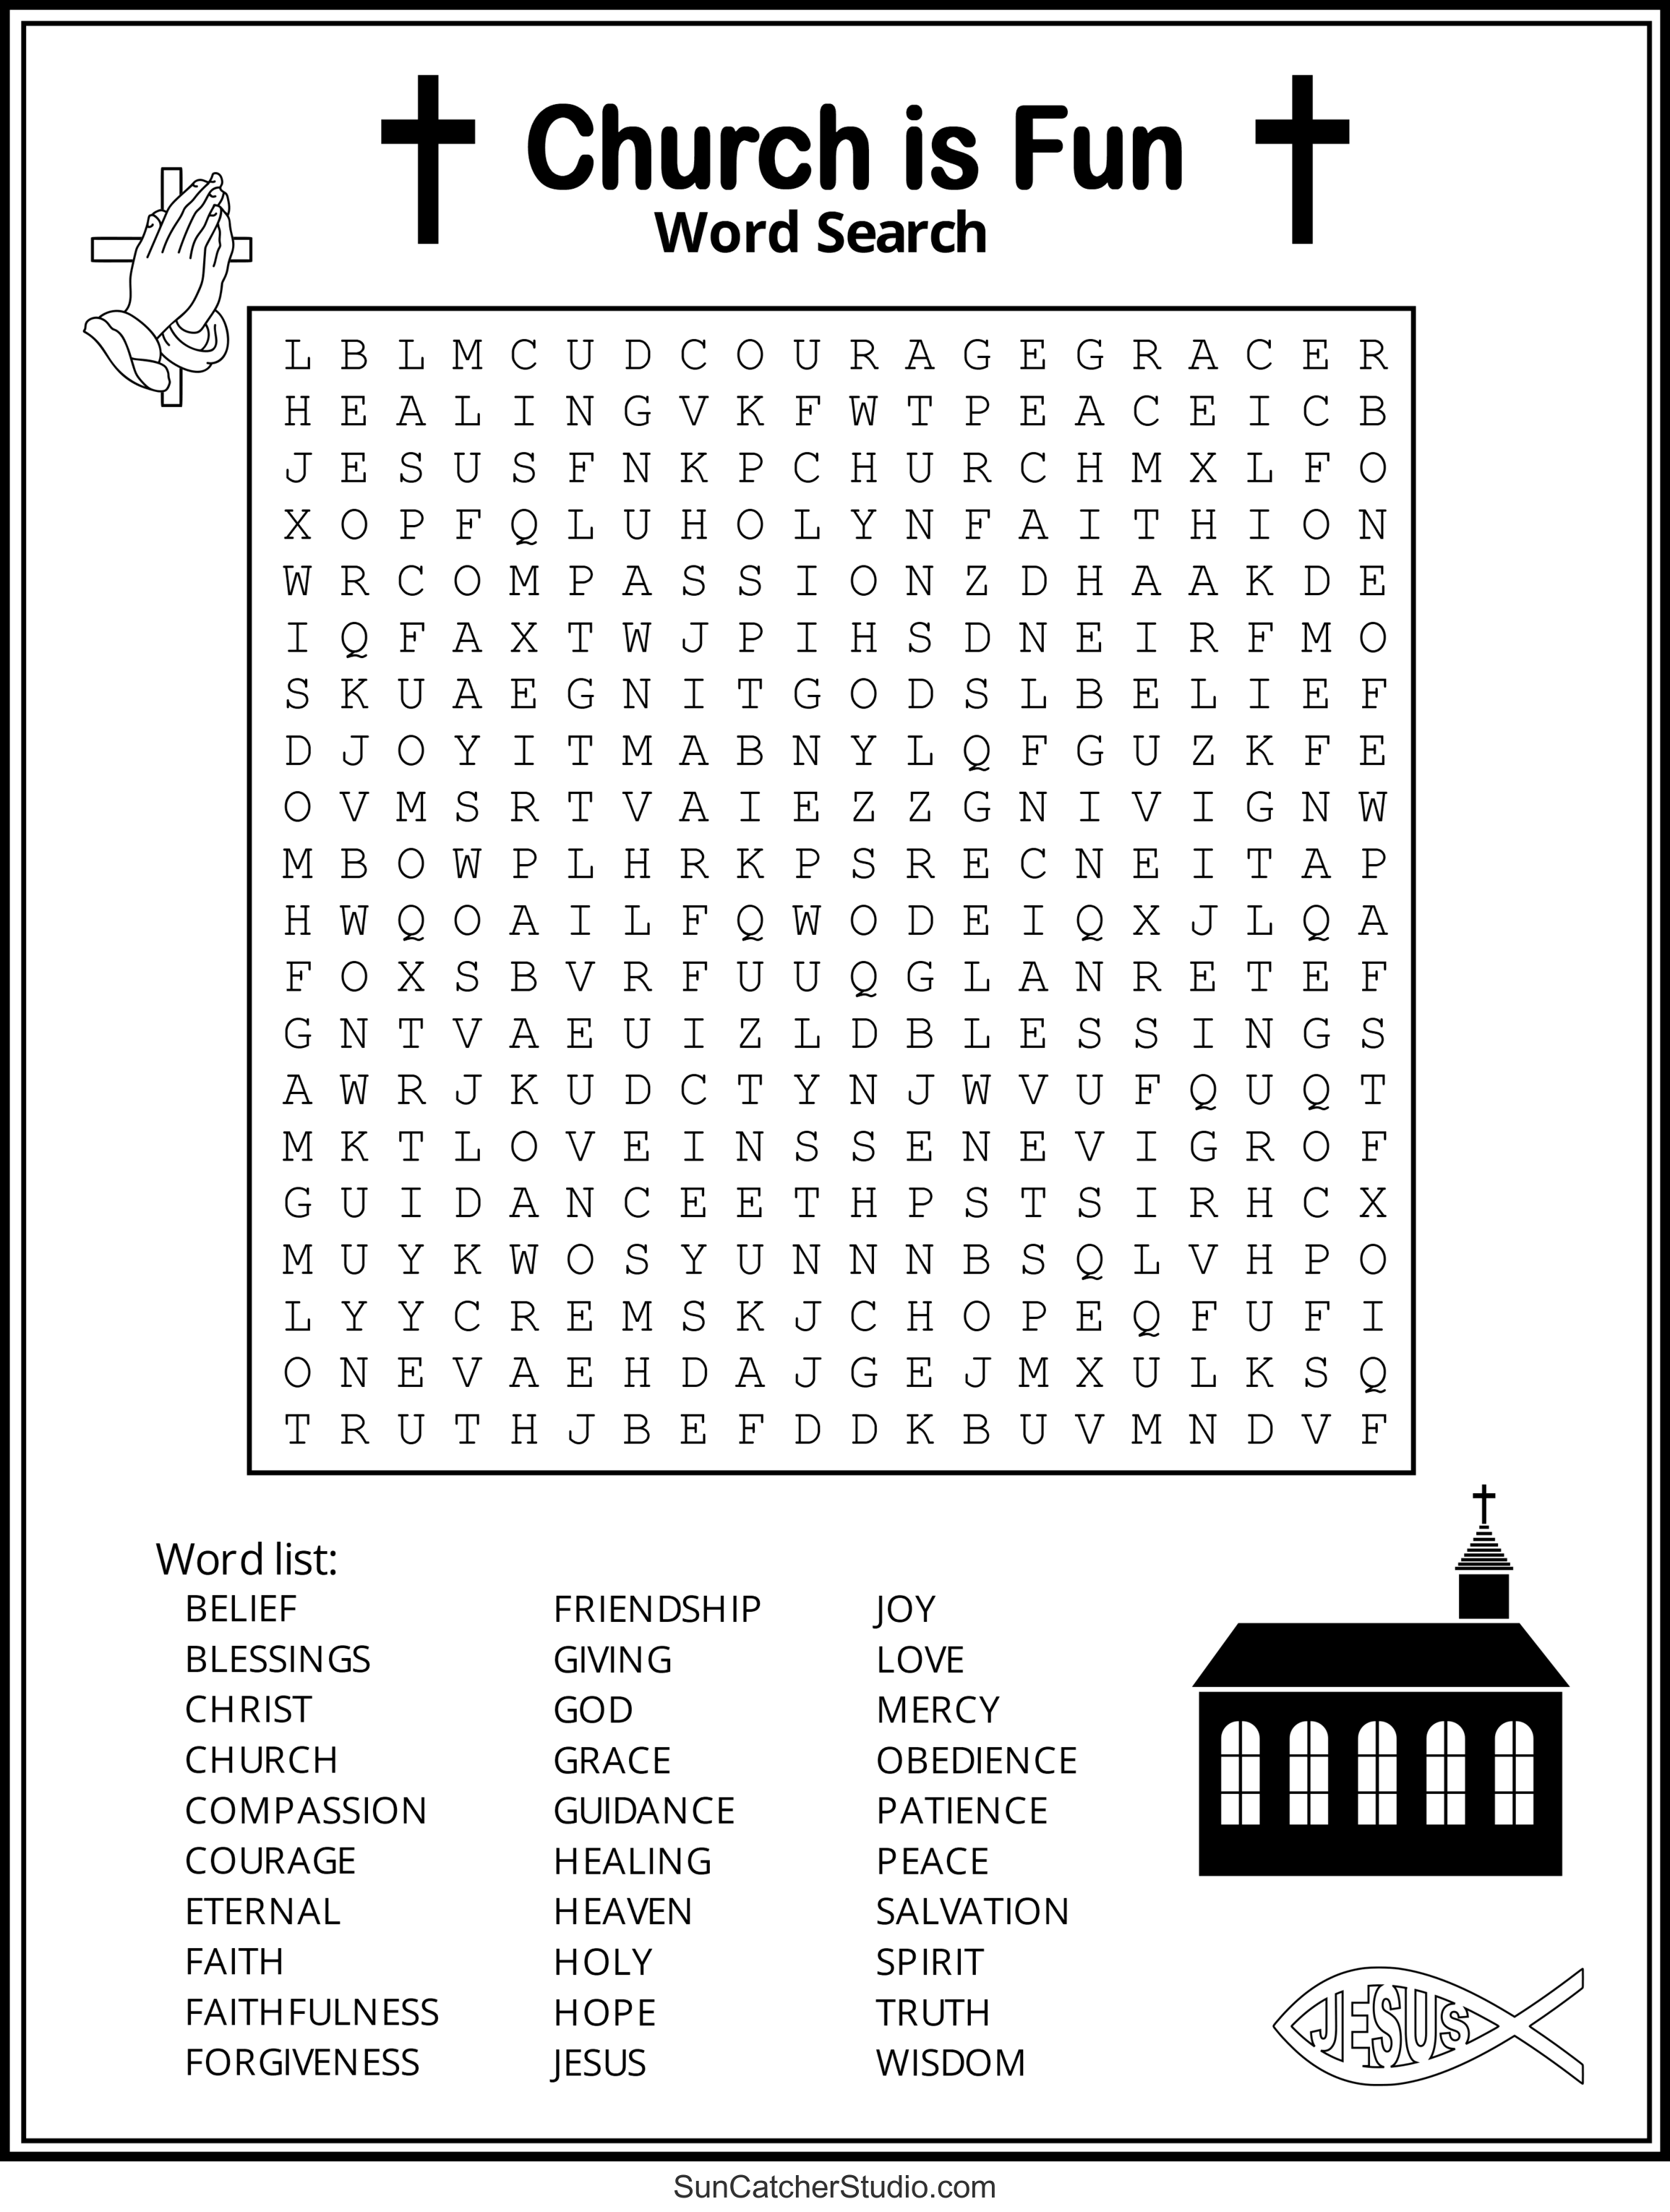 bible-word-search-free-printable-christian-puzzles-diy-projects